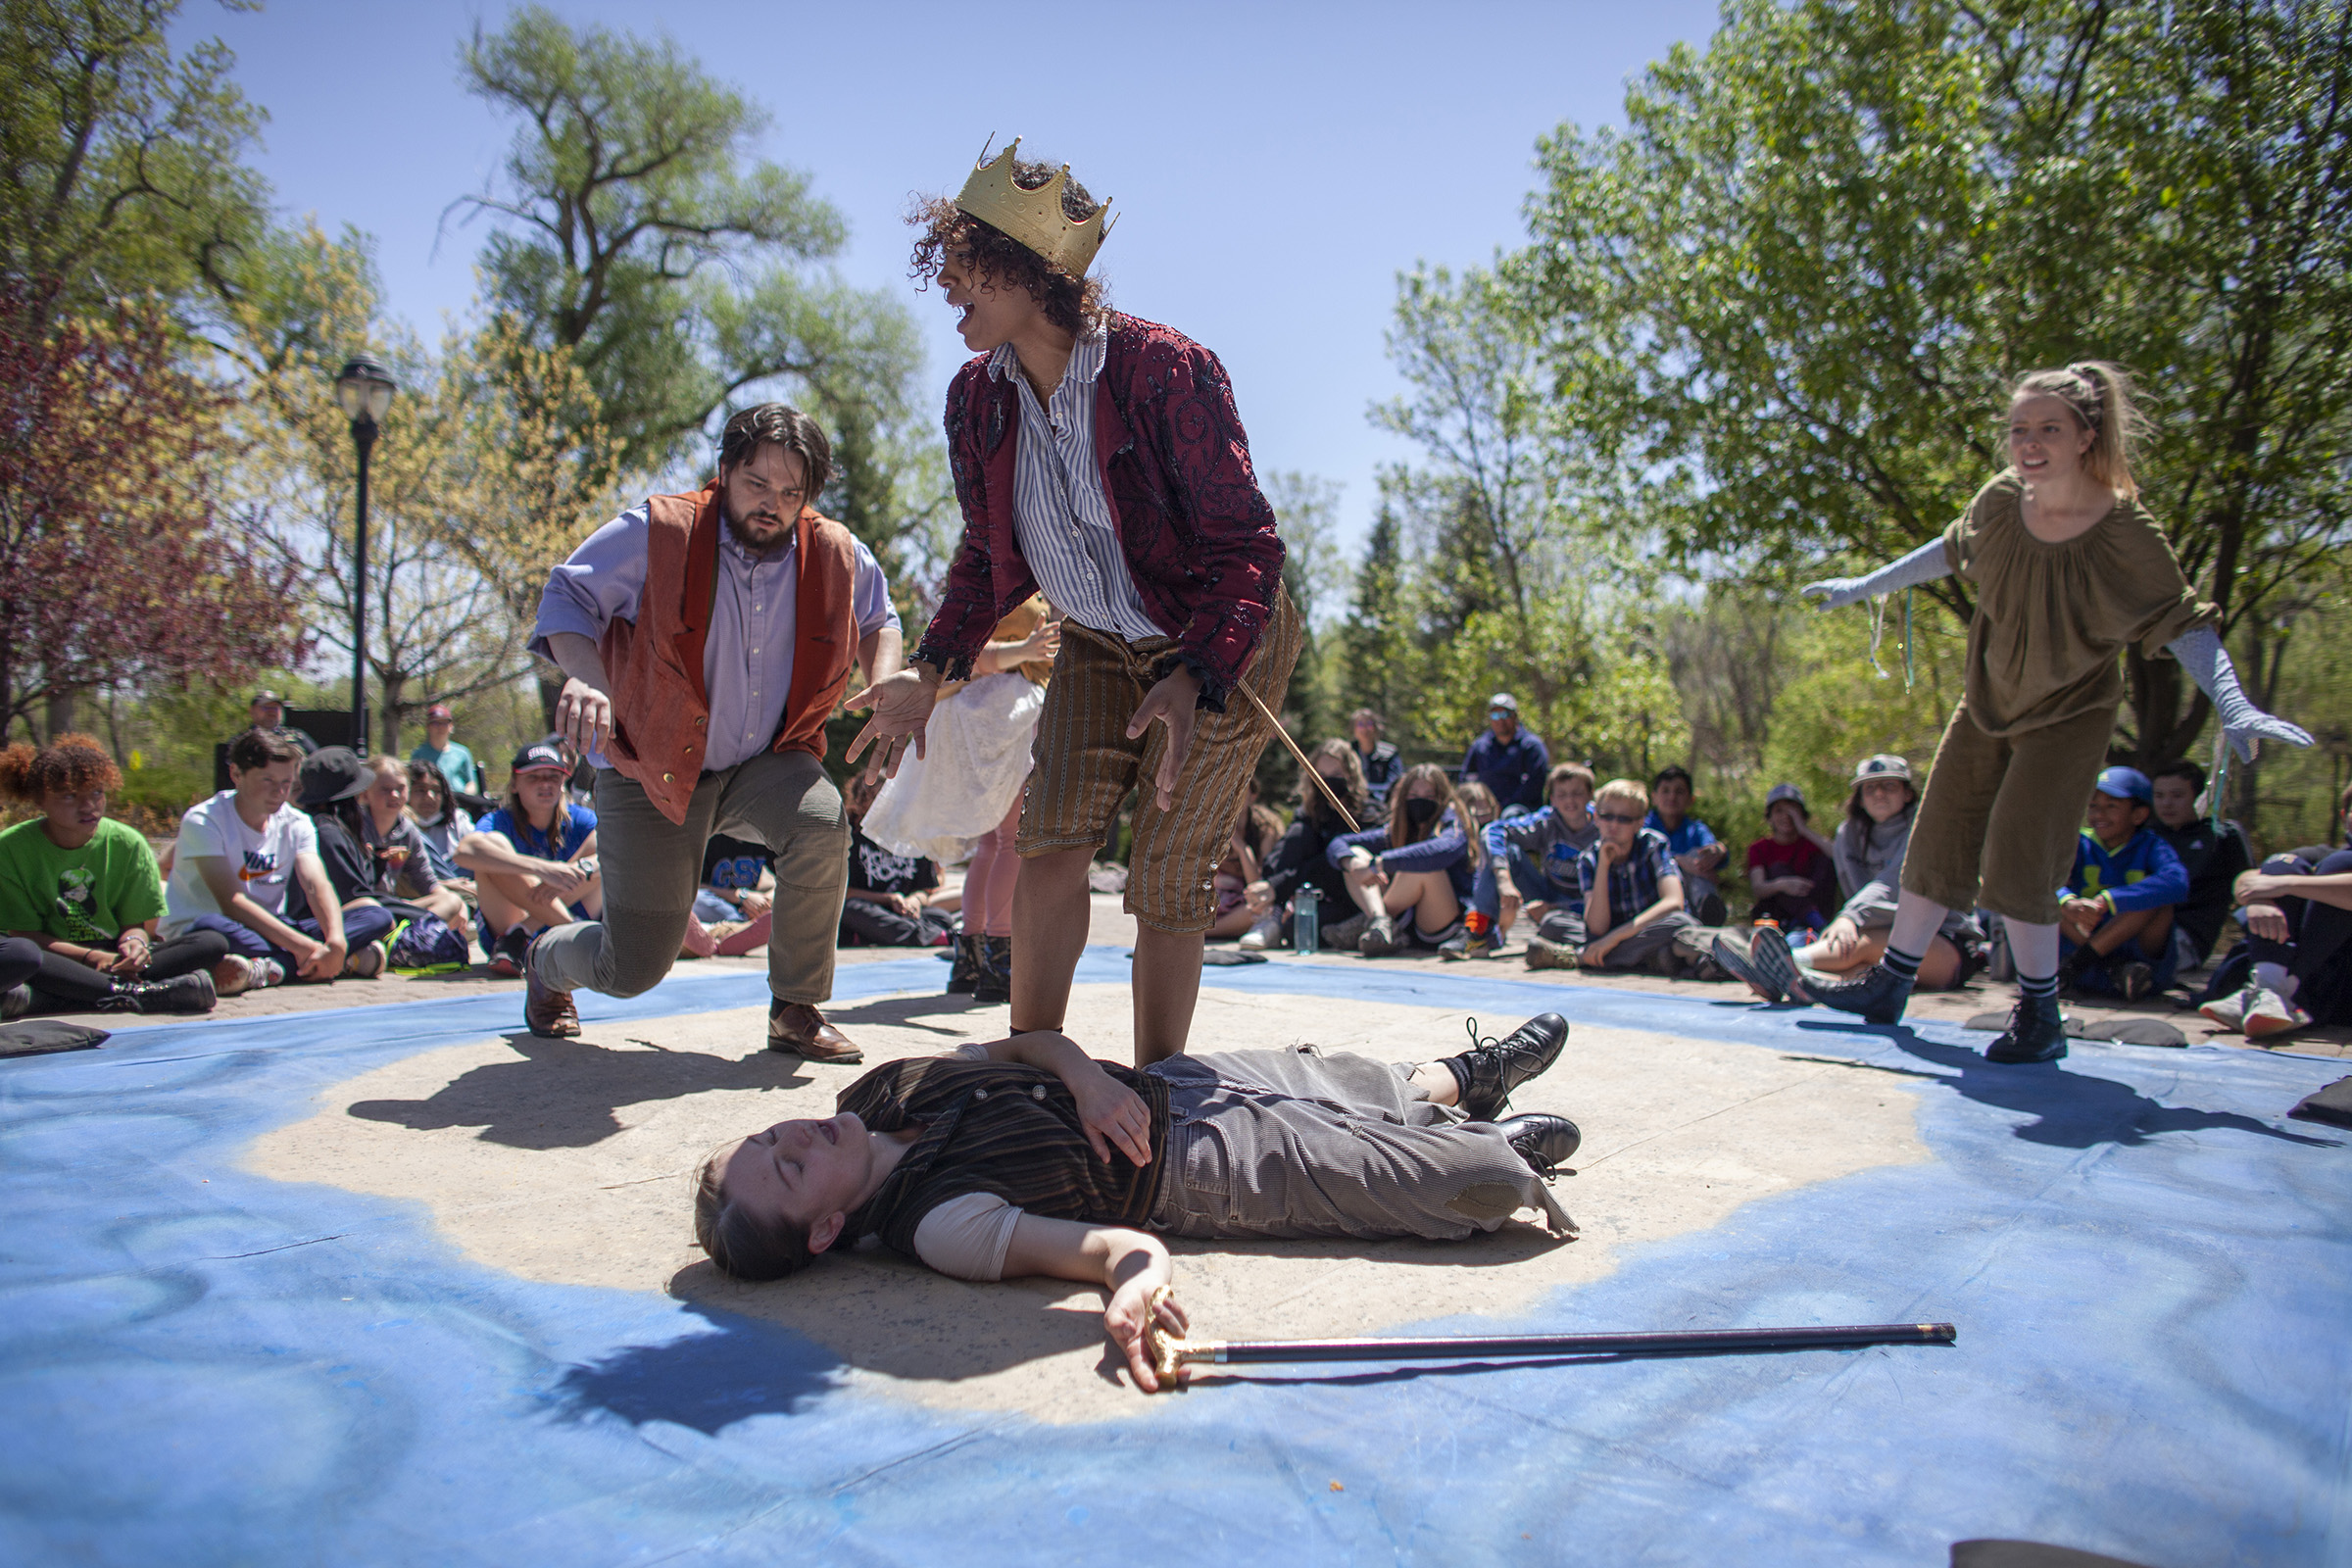 People perform on a cement square outside with students sitting around them. In the center there's a person wearing a crown and Shakespeare era clothing, seemingly crying out as a person with a cane lays at their feet, appearing to be dead.